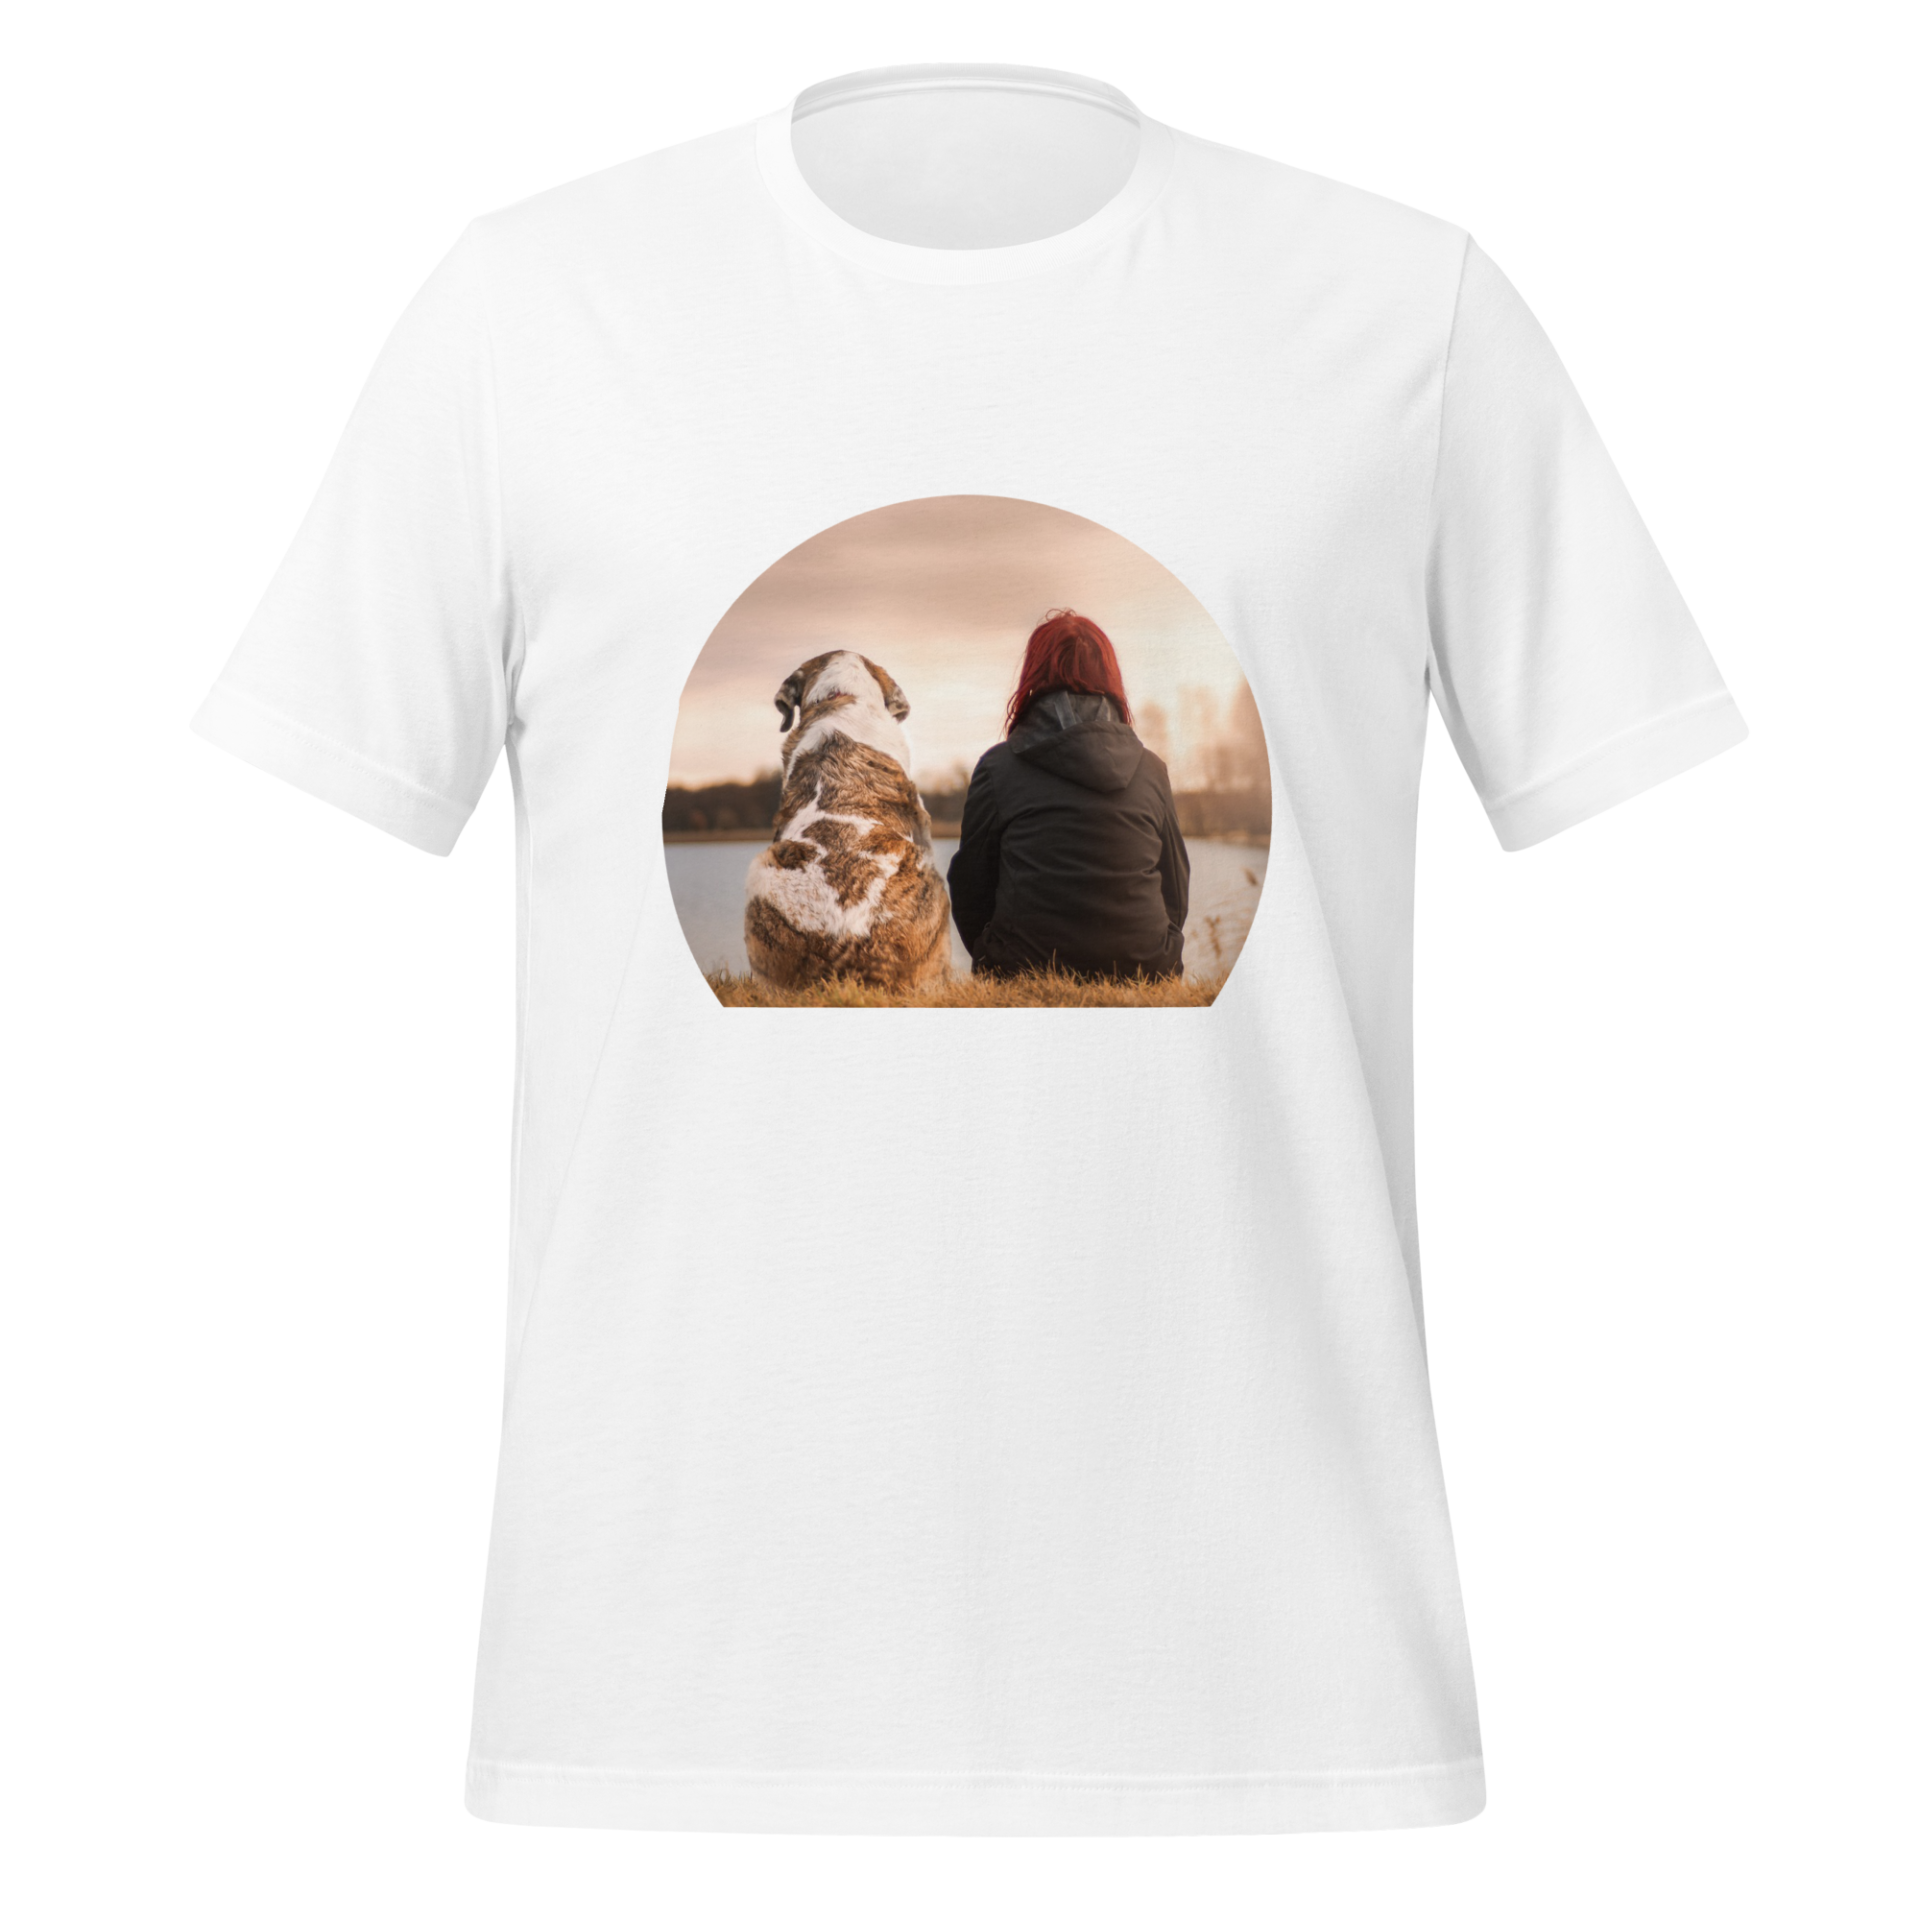 Print your favorite photo on a T-shirt. It can be a treat for yourself, for your loved one, or your furred friend.